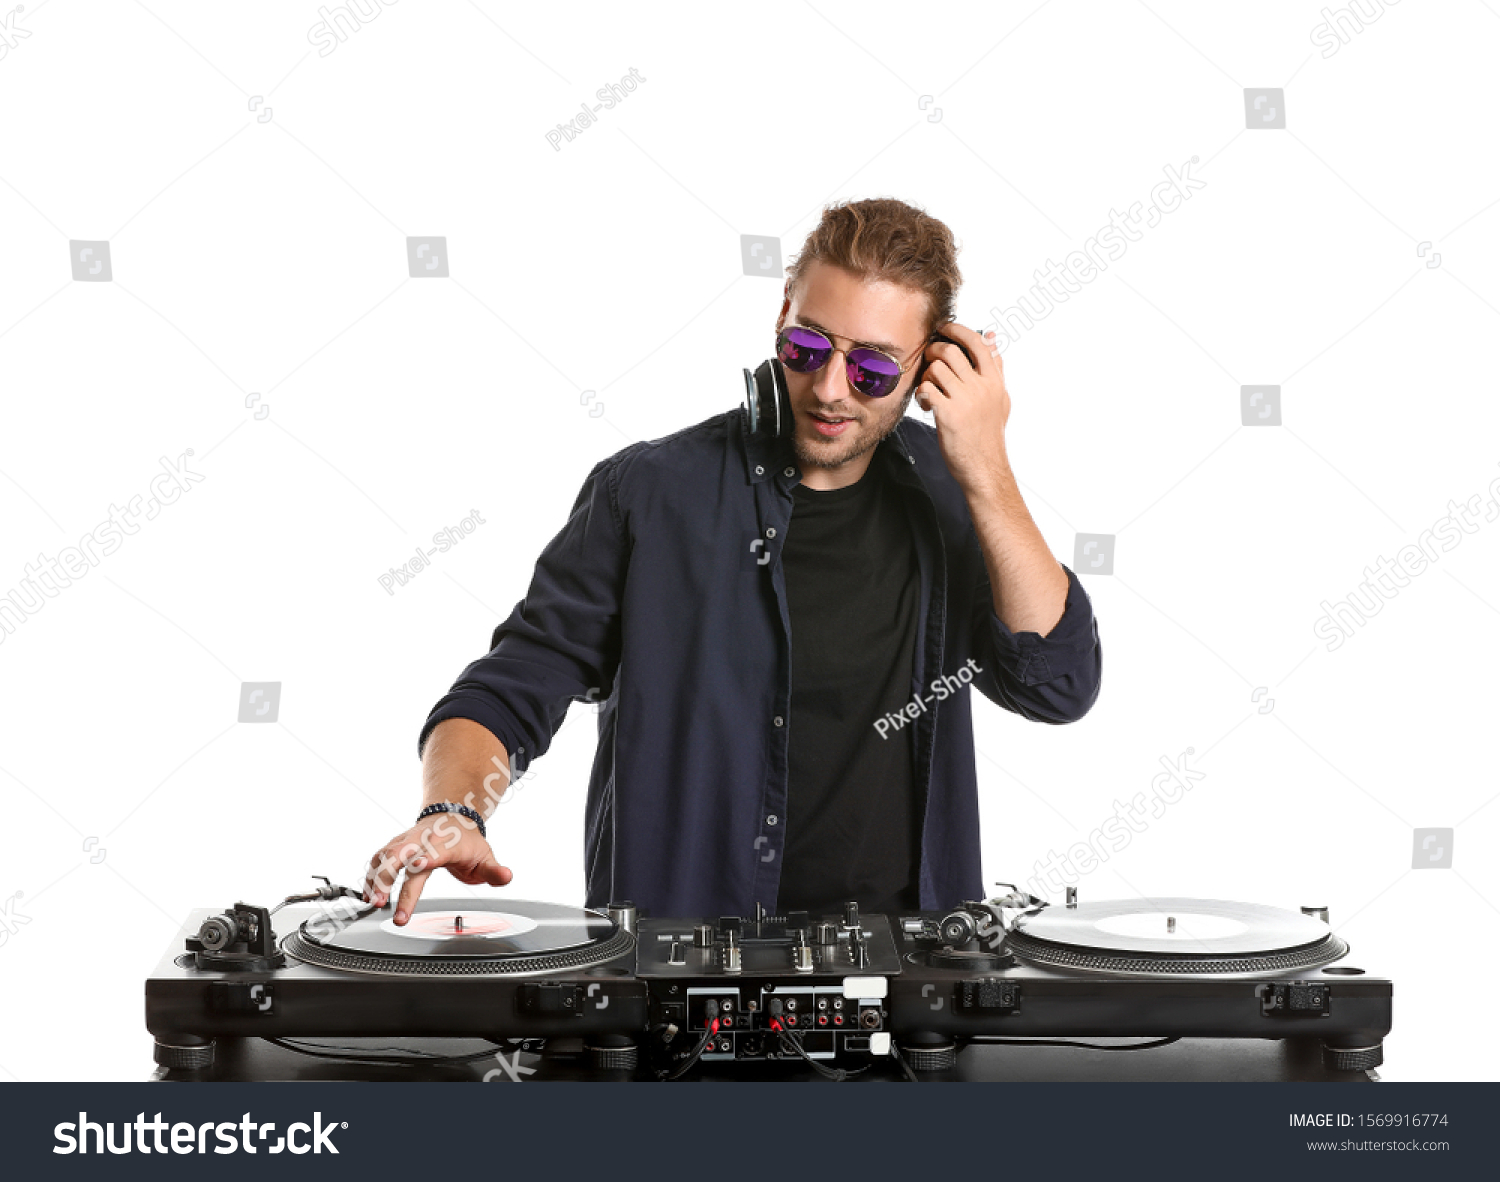 Male dj playing music on white background #1569916774